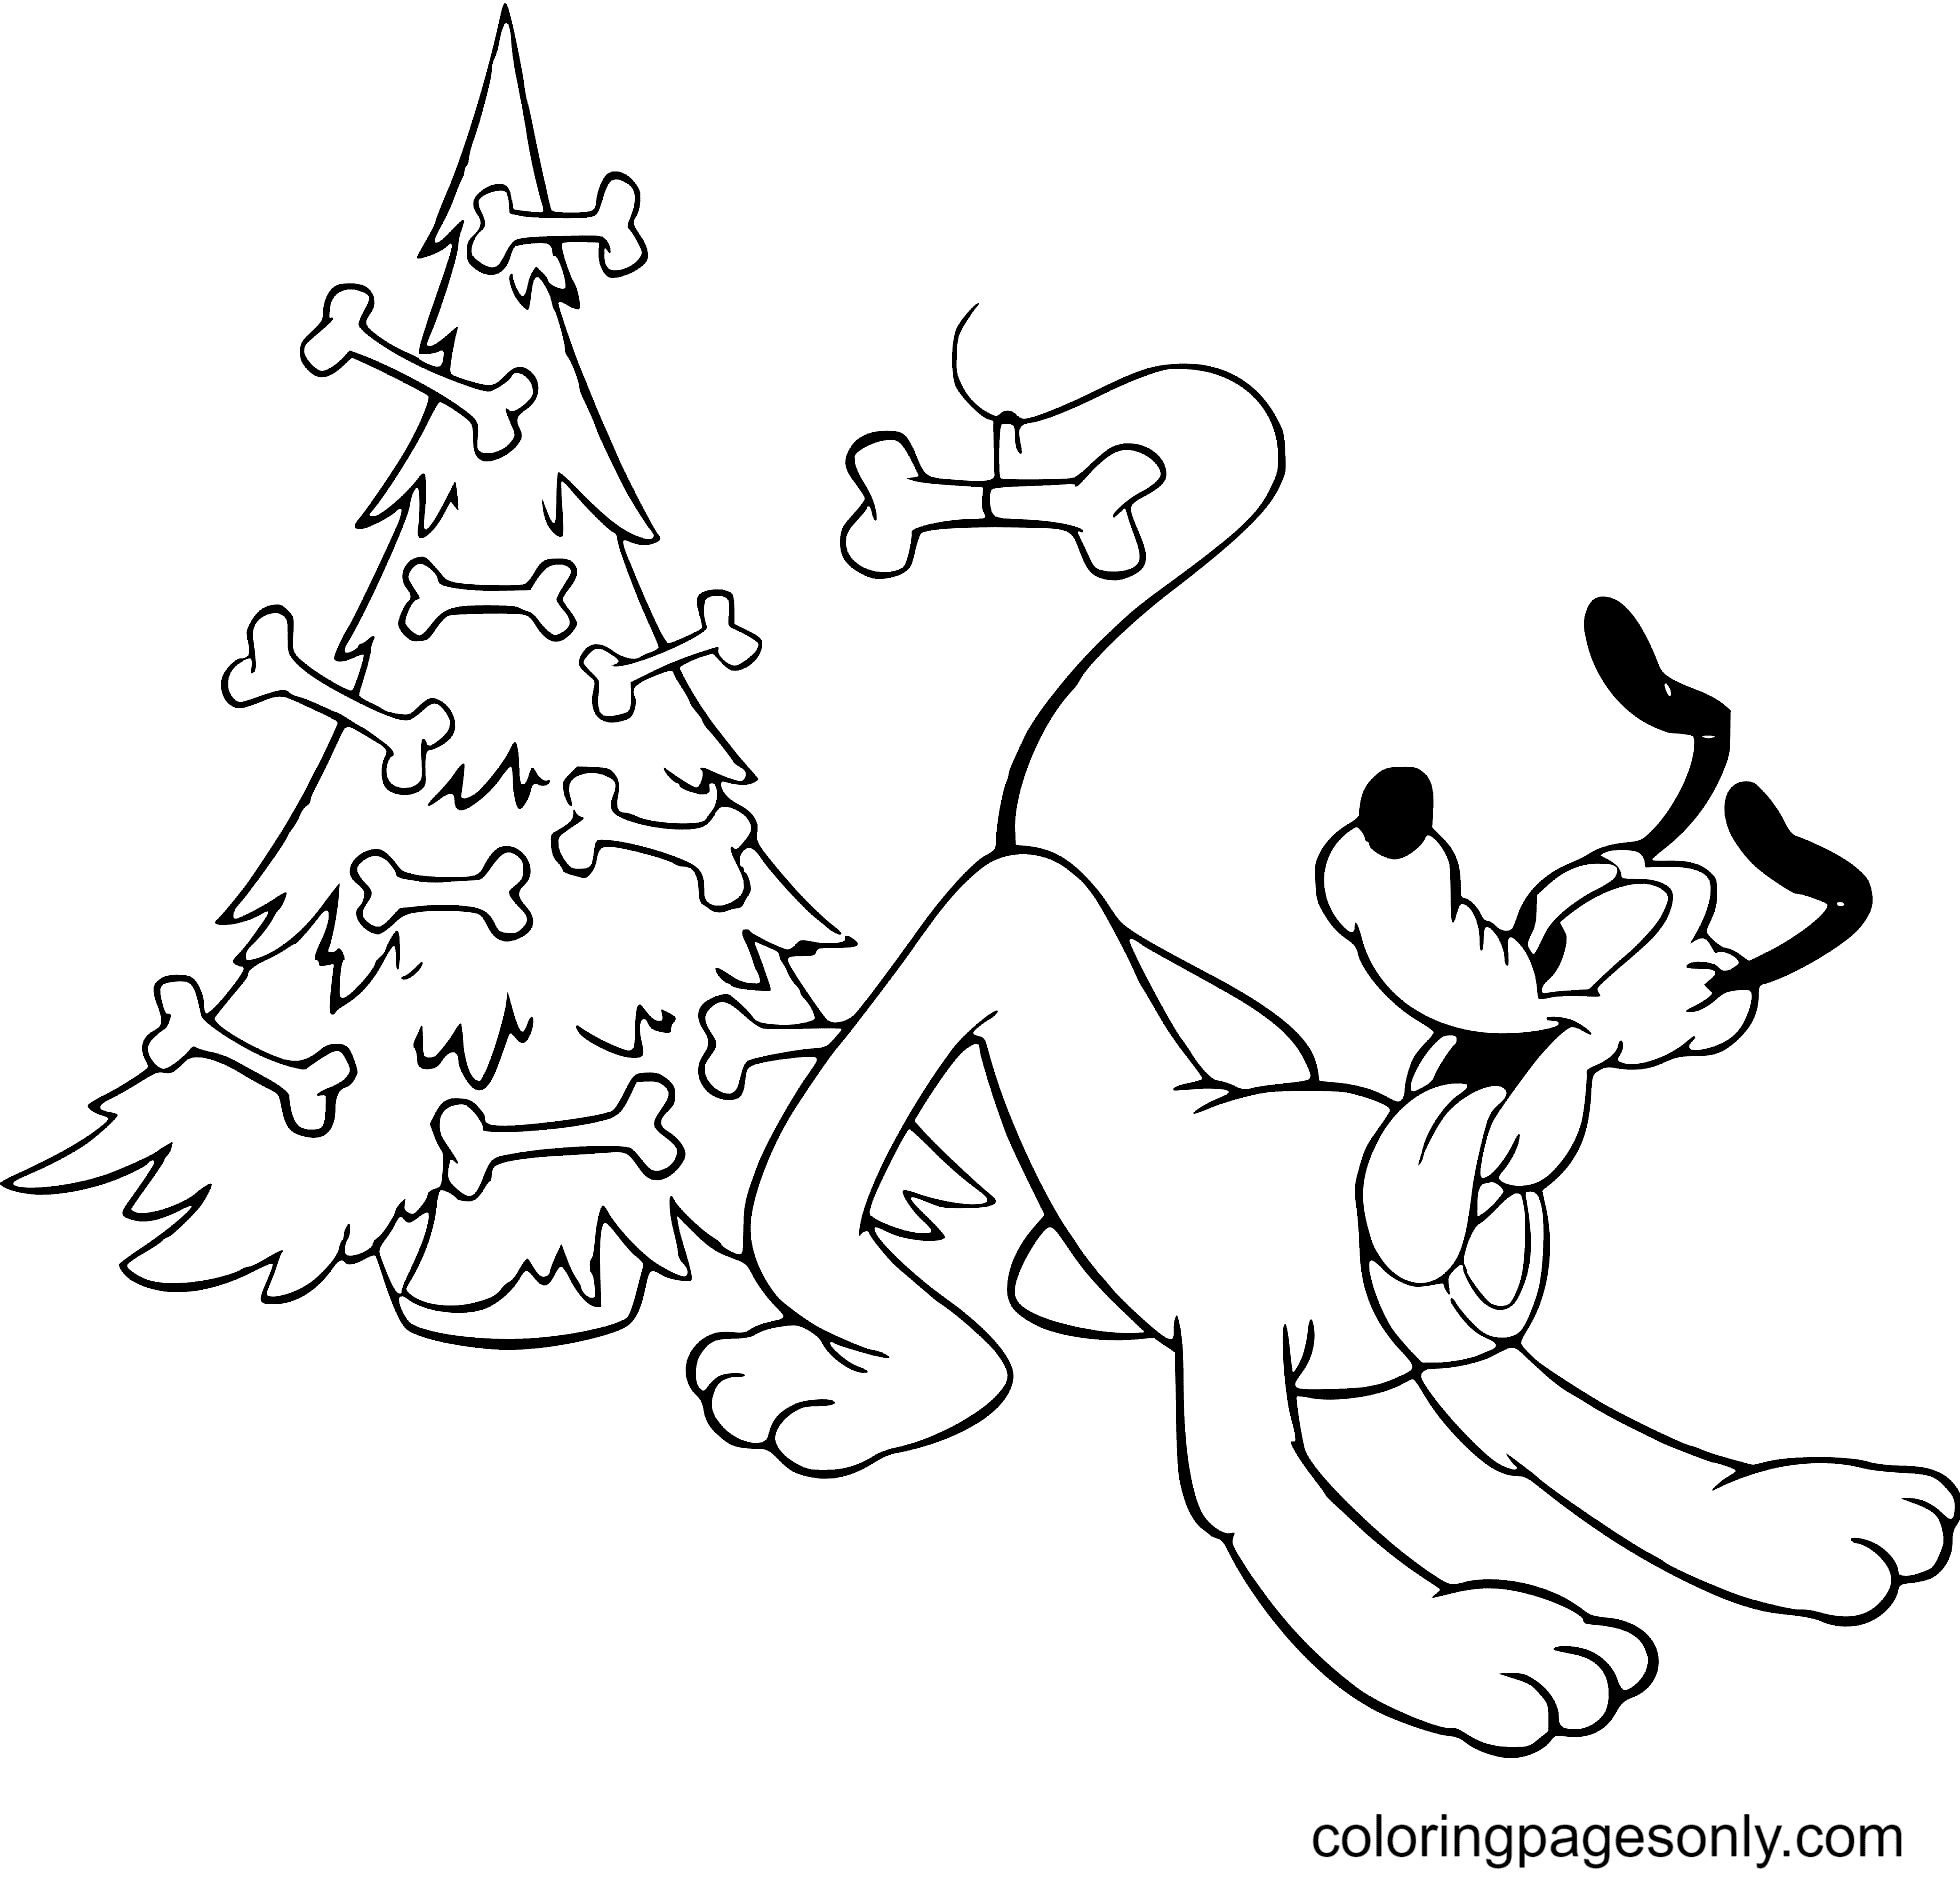 Pluto Decorating Tree with Bones Coloring Page